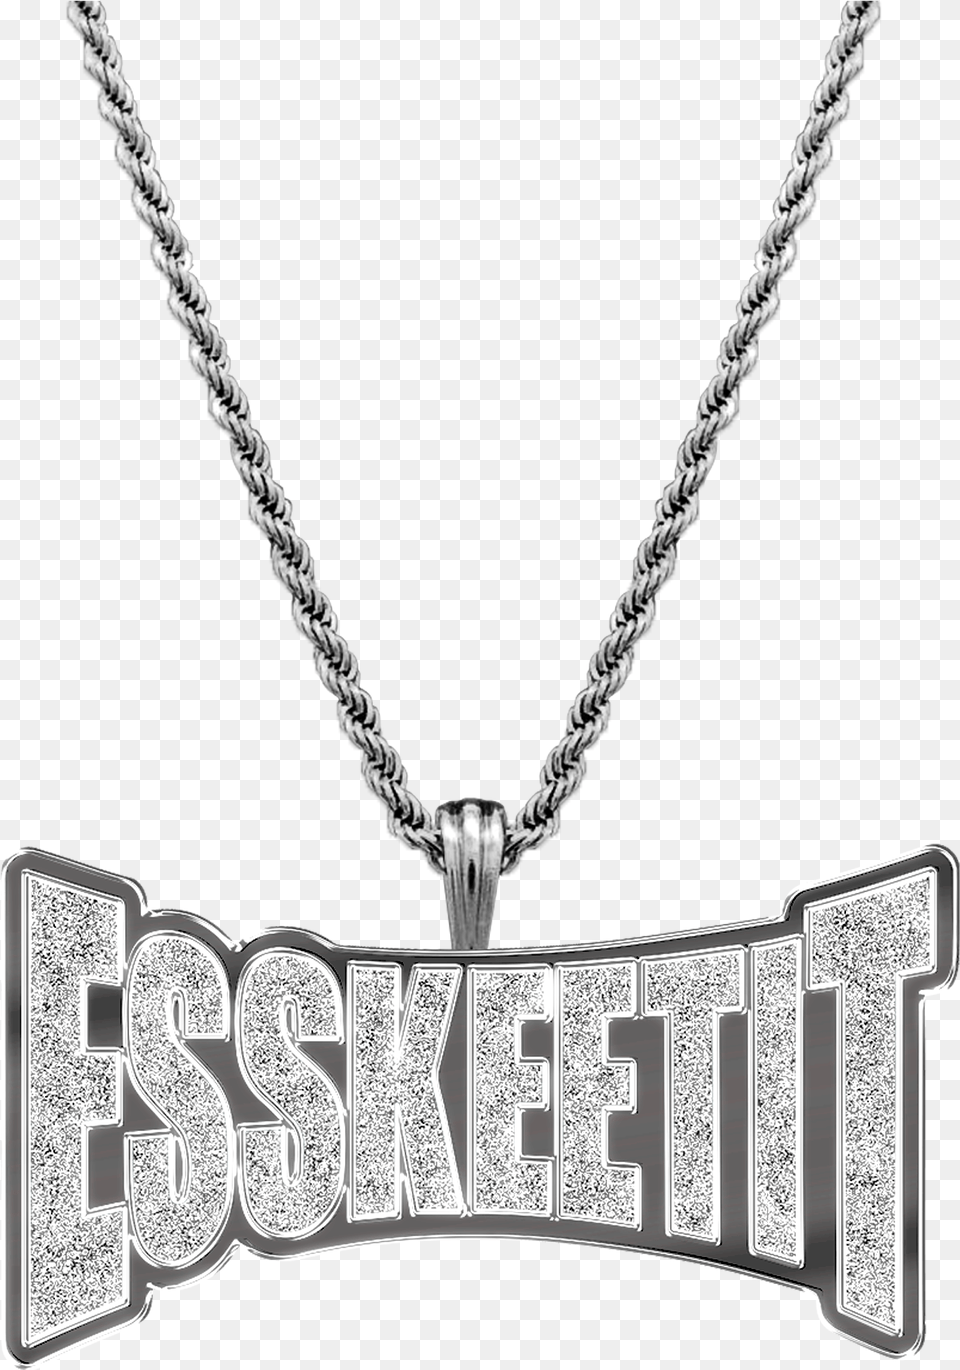 Lil Pump Esskeetit Chain, Accessories, Jewelry, Necklace, Diamond Png Image